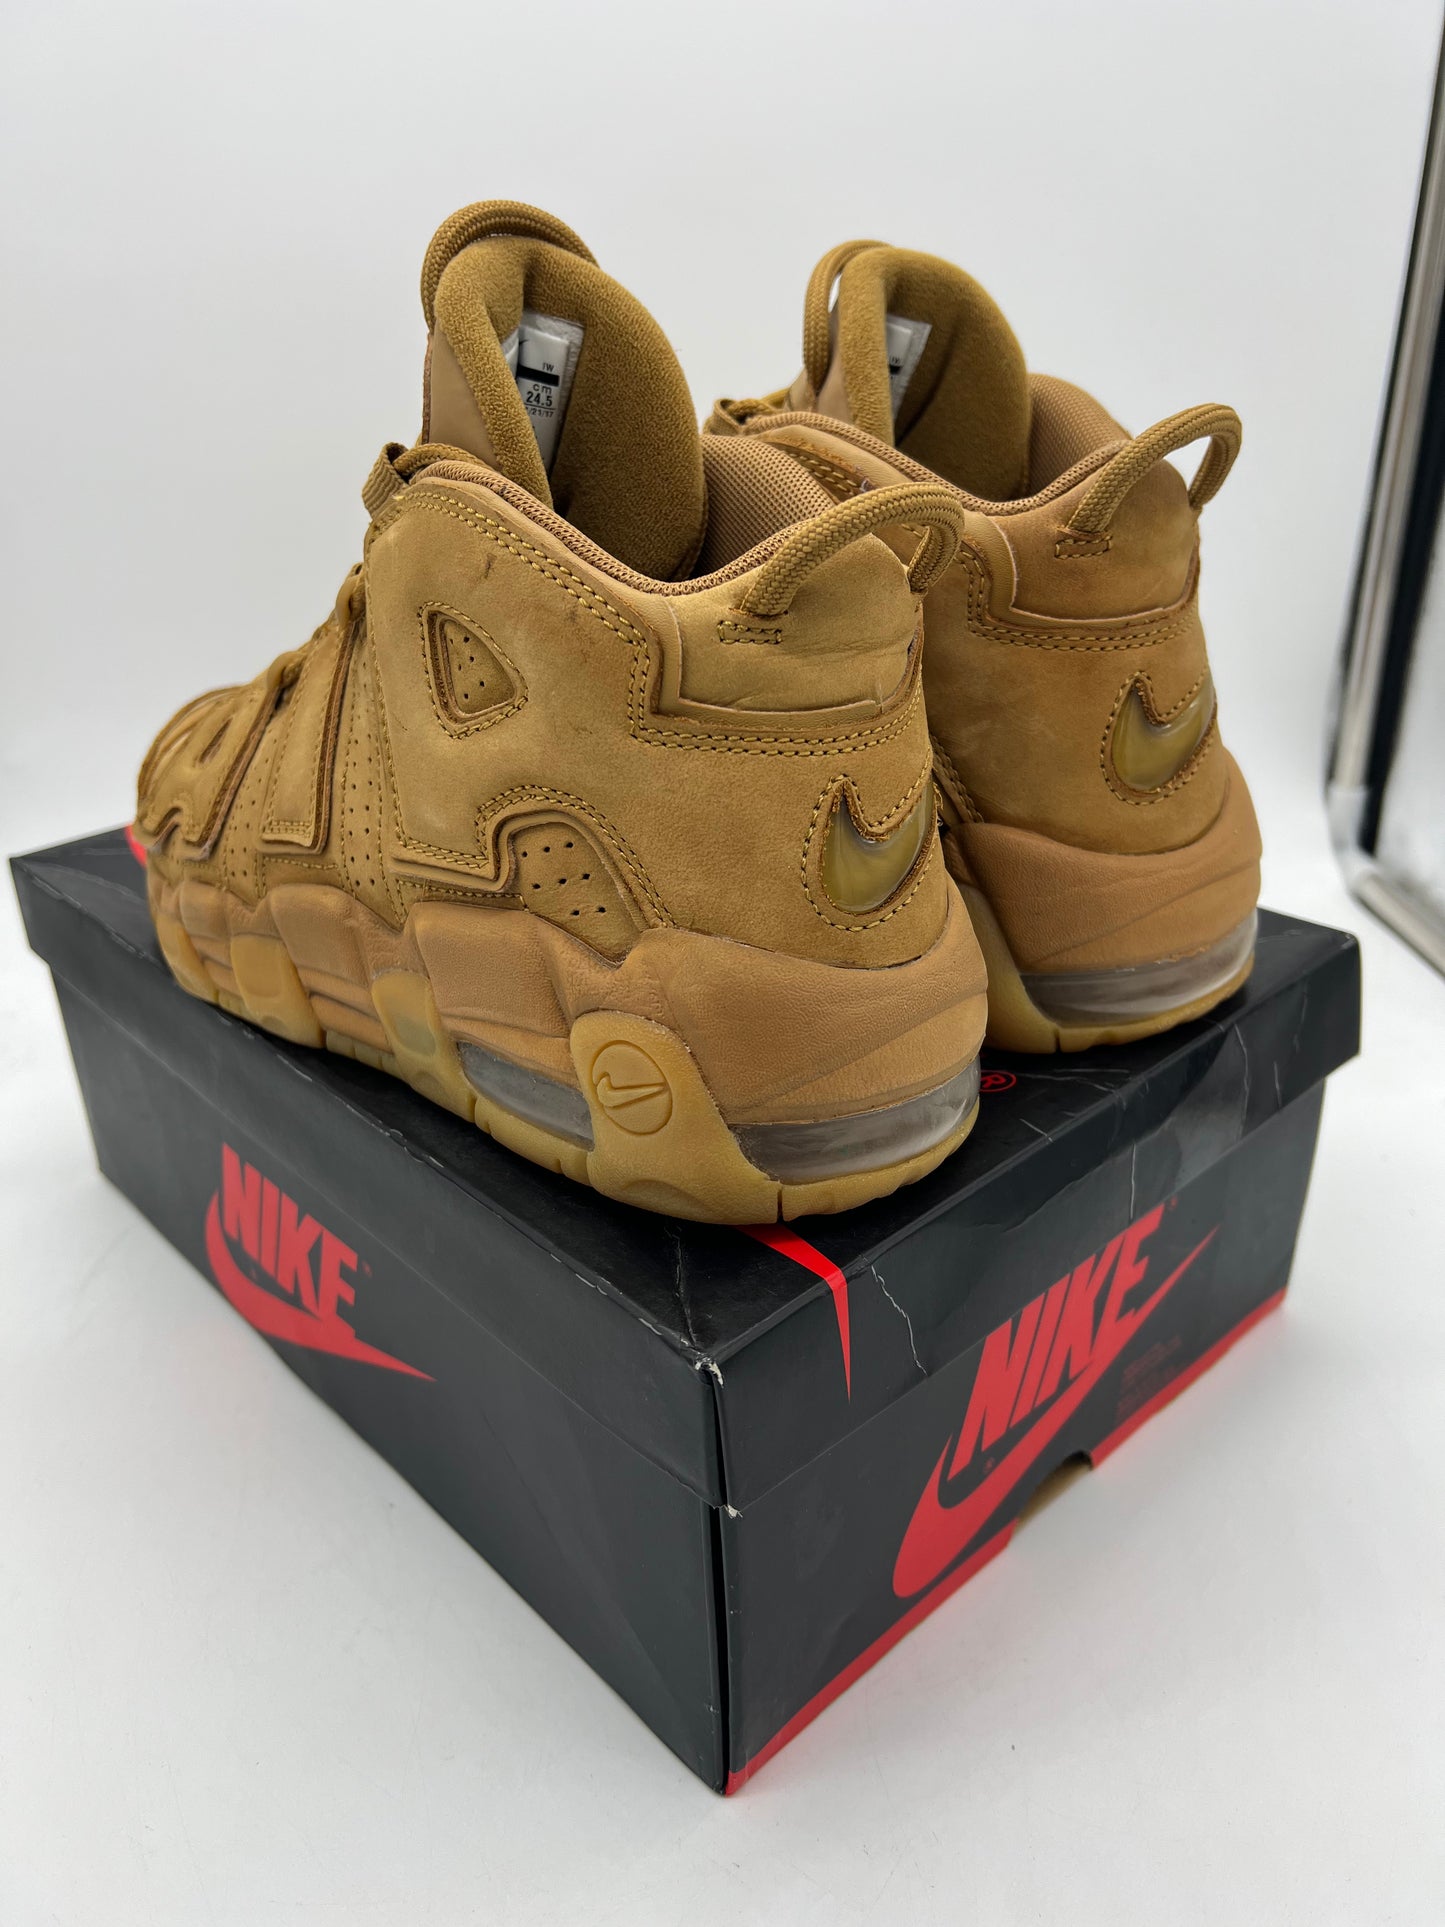 Used Nike More Uptempo Gs 'Flax' Sz 6.5y